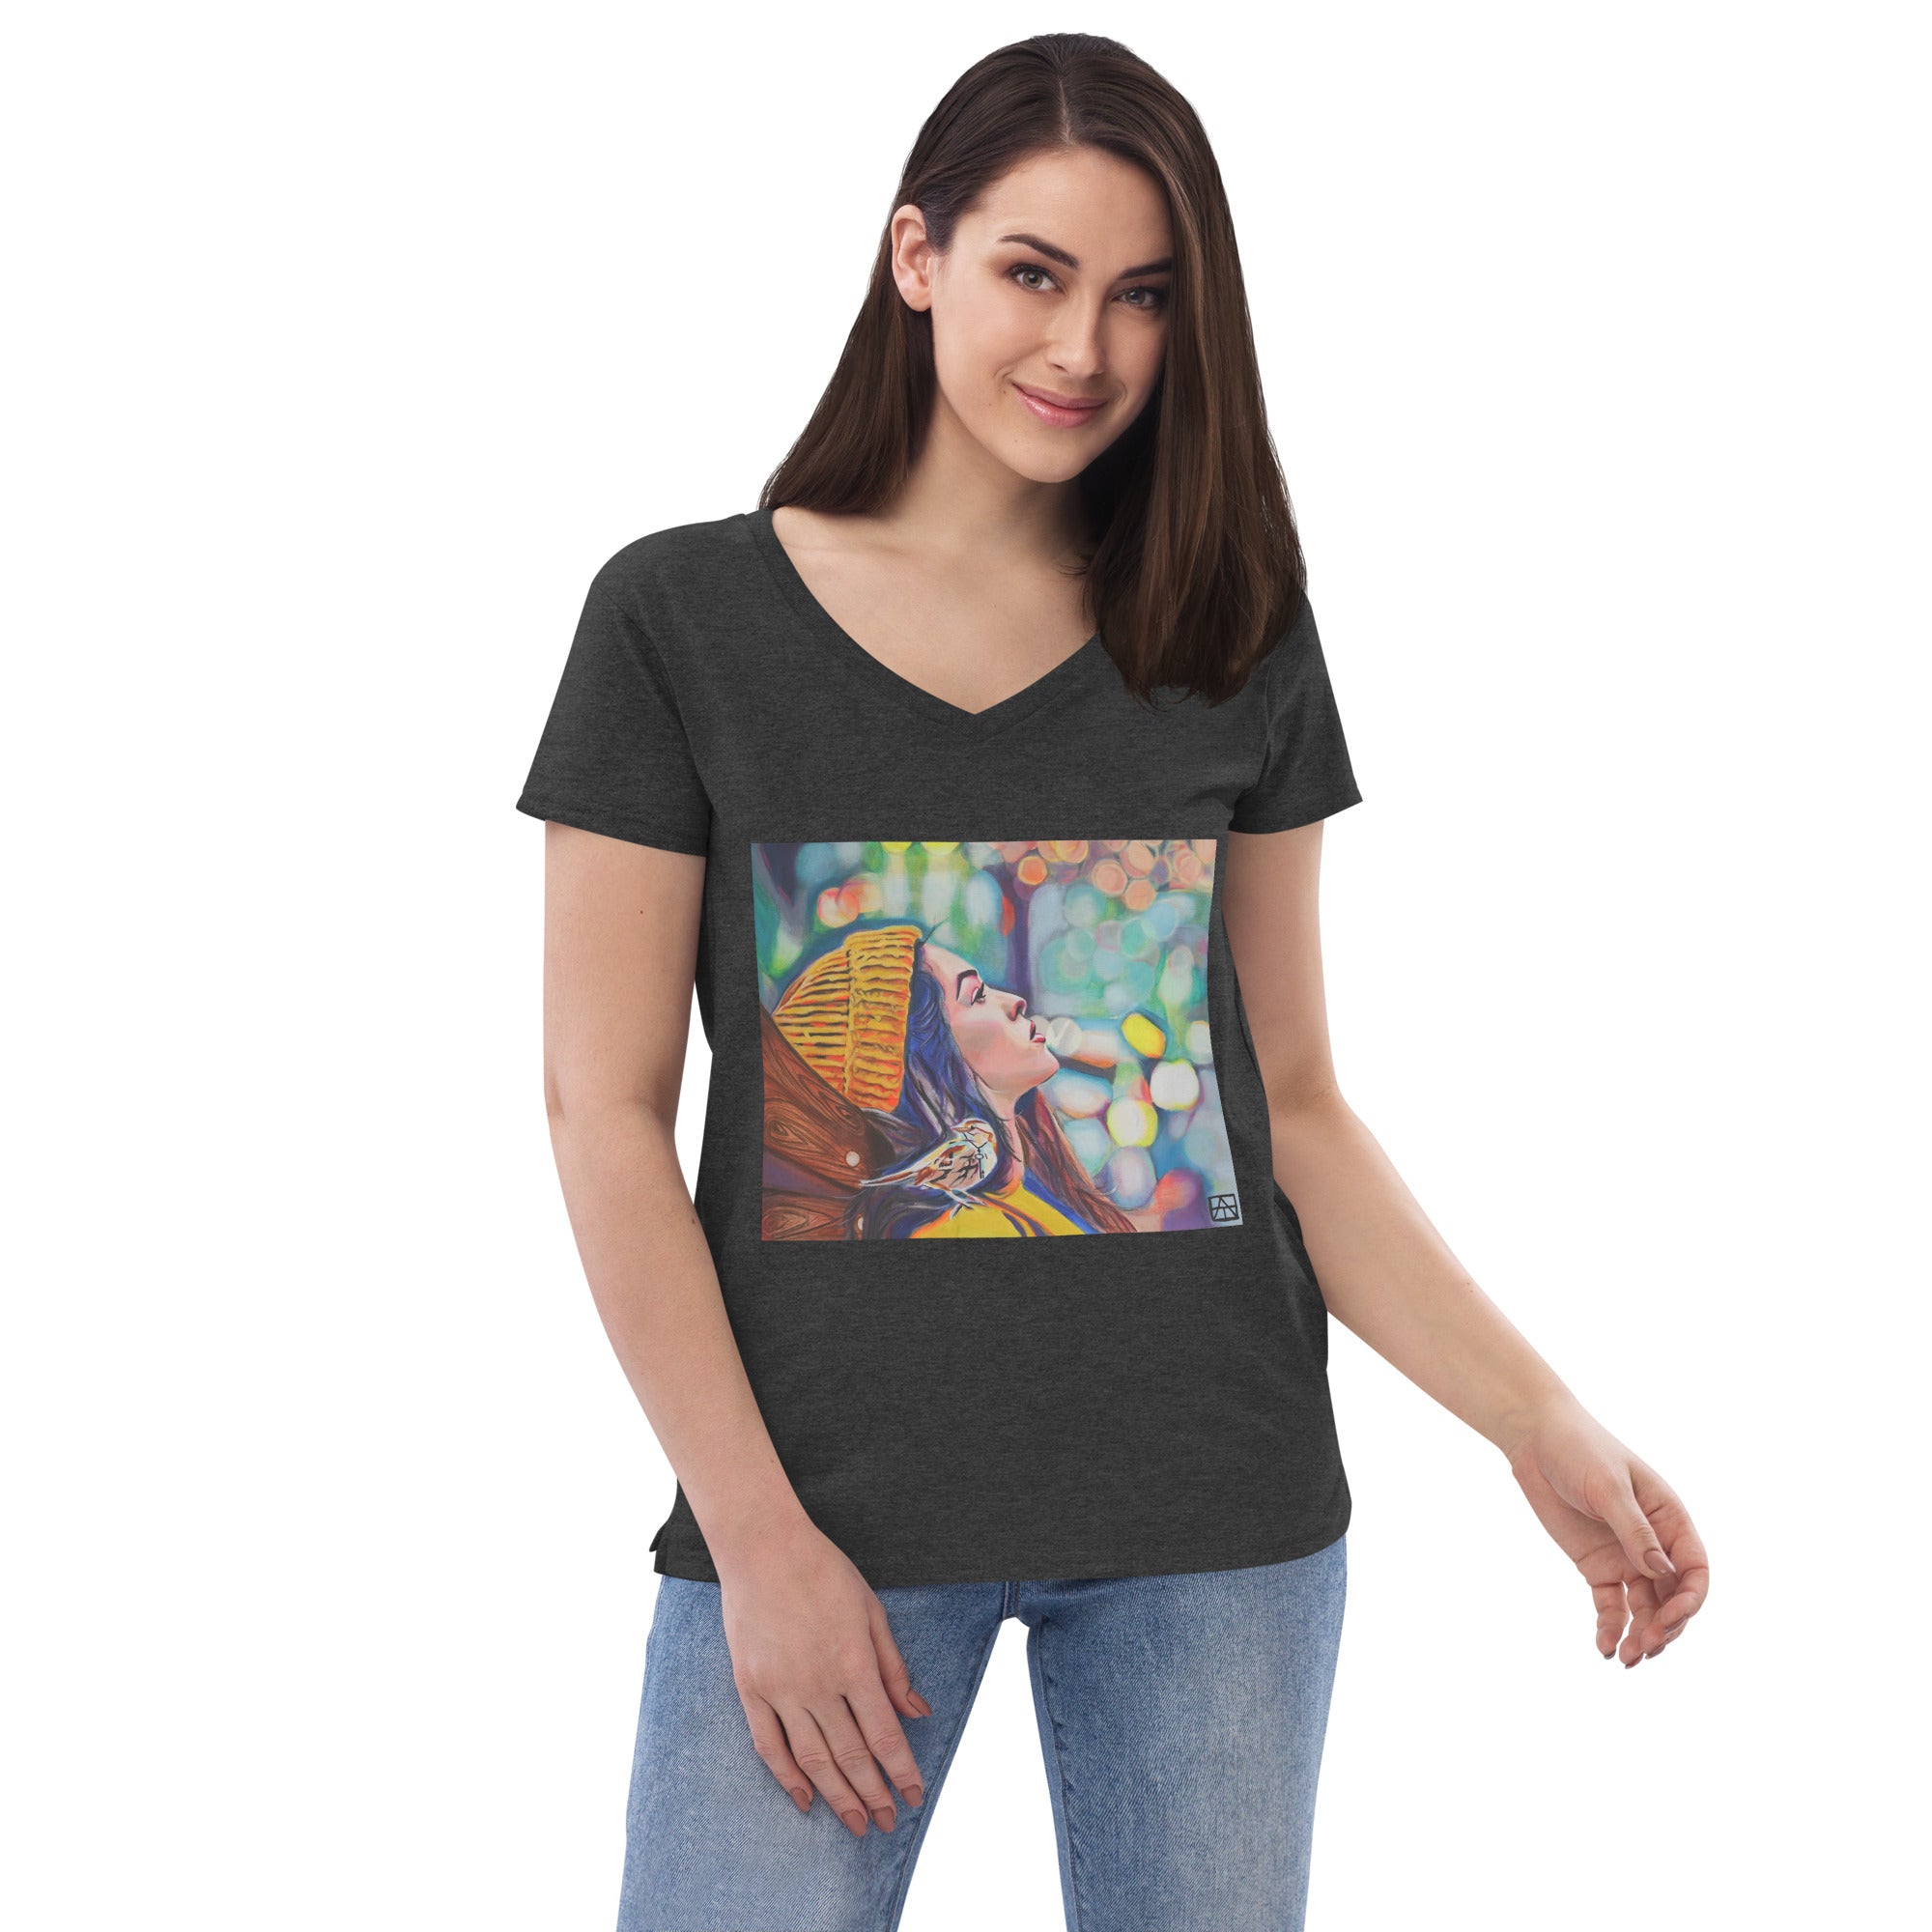 womens-recycled-v-neck-t-shirt-charcoal-heather-front-2-633f1e07f23a2.jpg